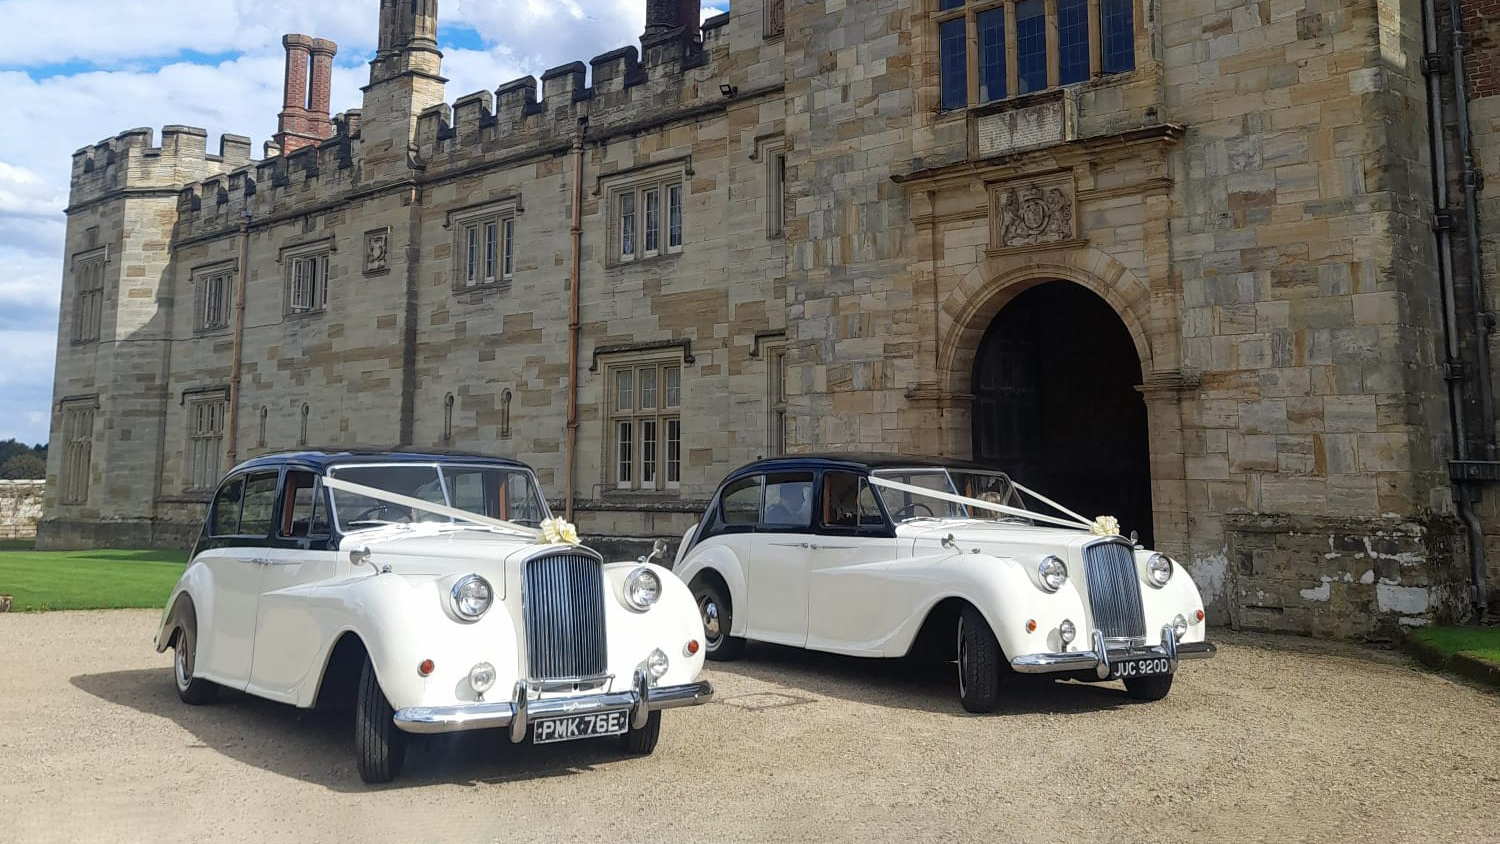 Two Classic Austin Princess Limousine decorated with Ivory Ribbons and Bows on top of the front grill. Vehicles are parked in front of a large manor house in Sittingbourne